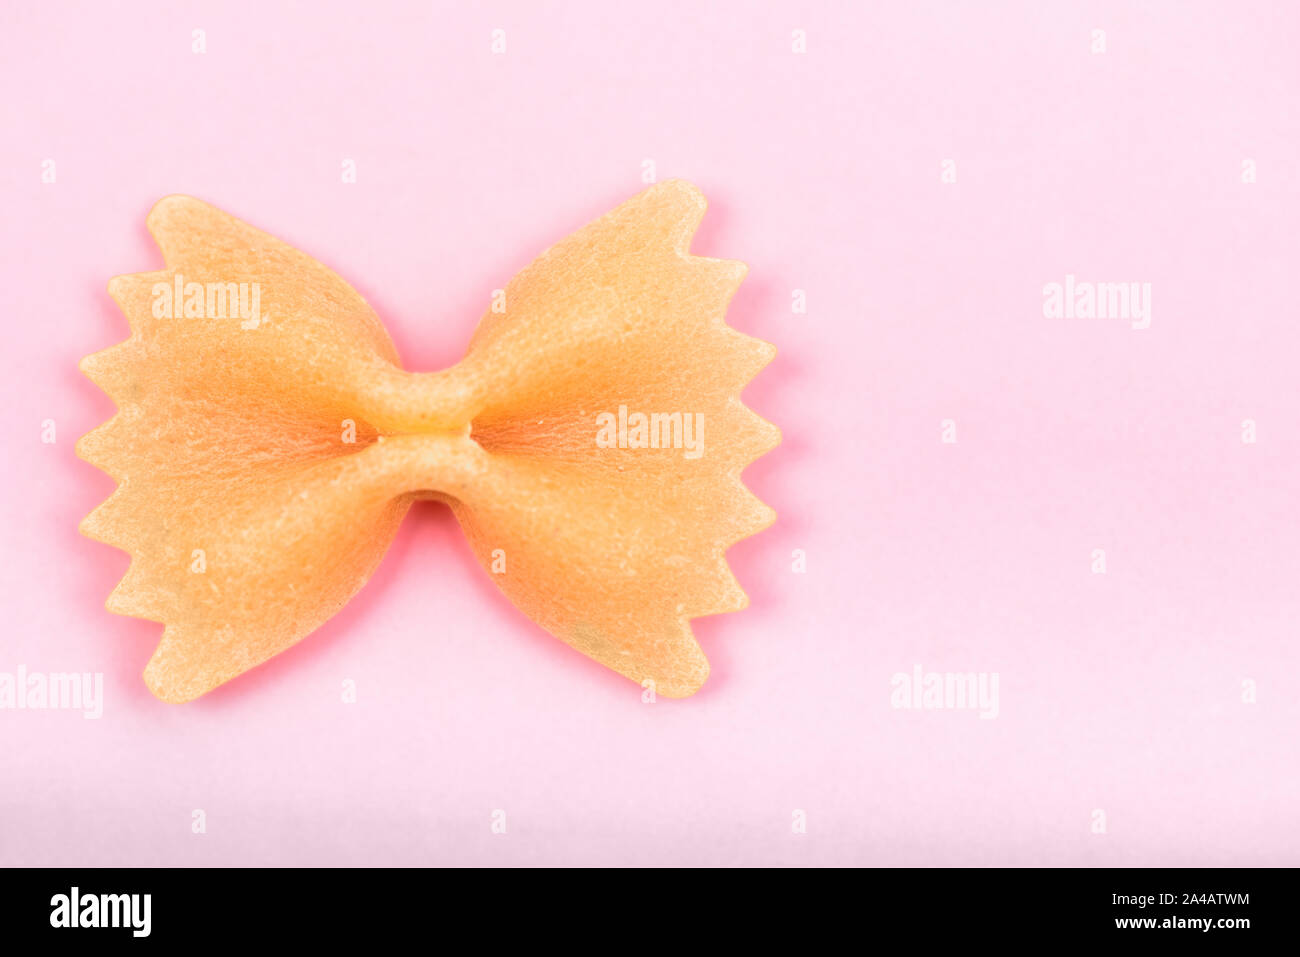 Farfalle tie bow shaped pasta macro on pink background isolated with clipping path Stock Photo